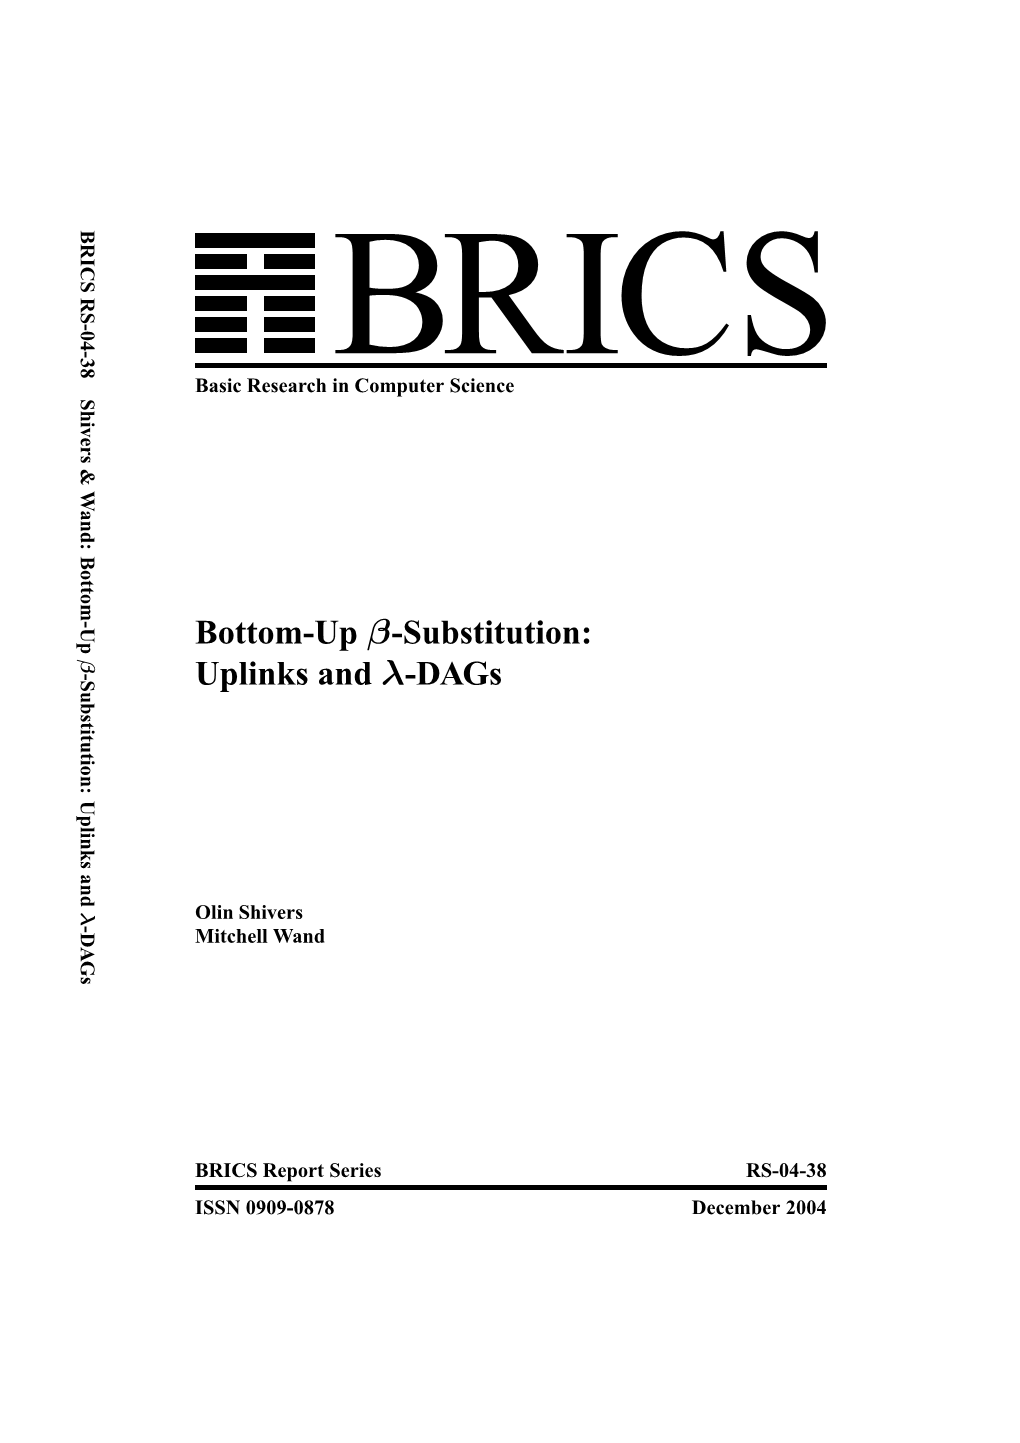 Bottom-Up Β-Substitution: Β Sbttto:Ulnsand Uplinks -Substitution: Uplinks and Λ-Dags